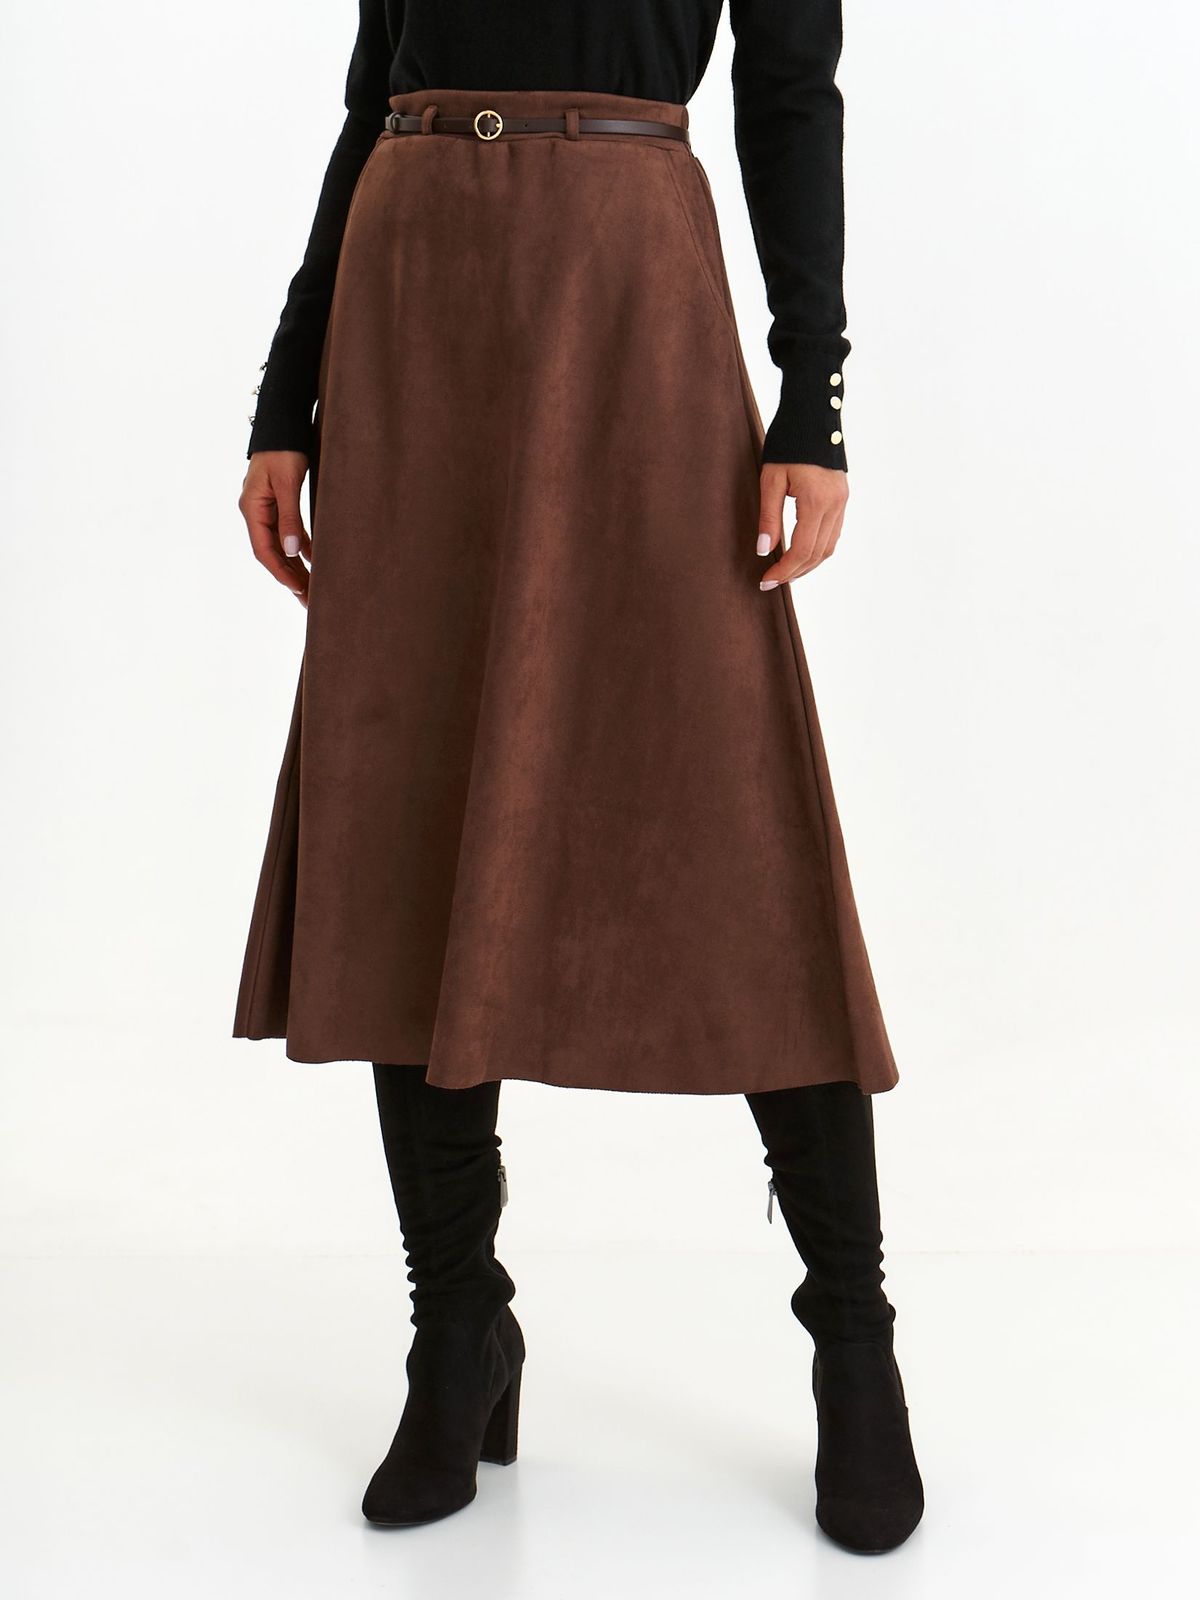 Brown skirt from ecological leather from suede midi cloche accessorized with belt